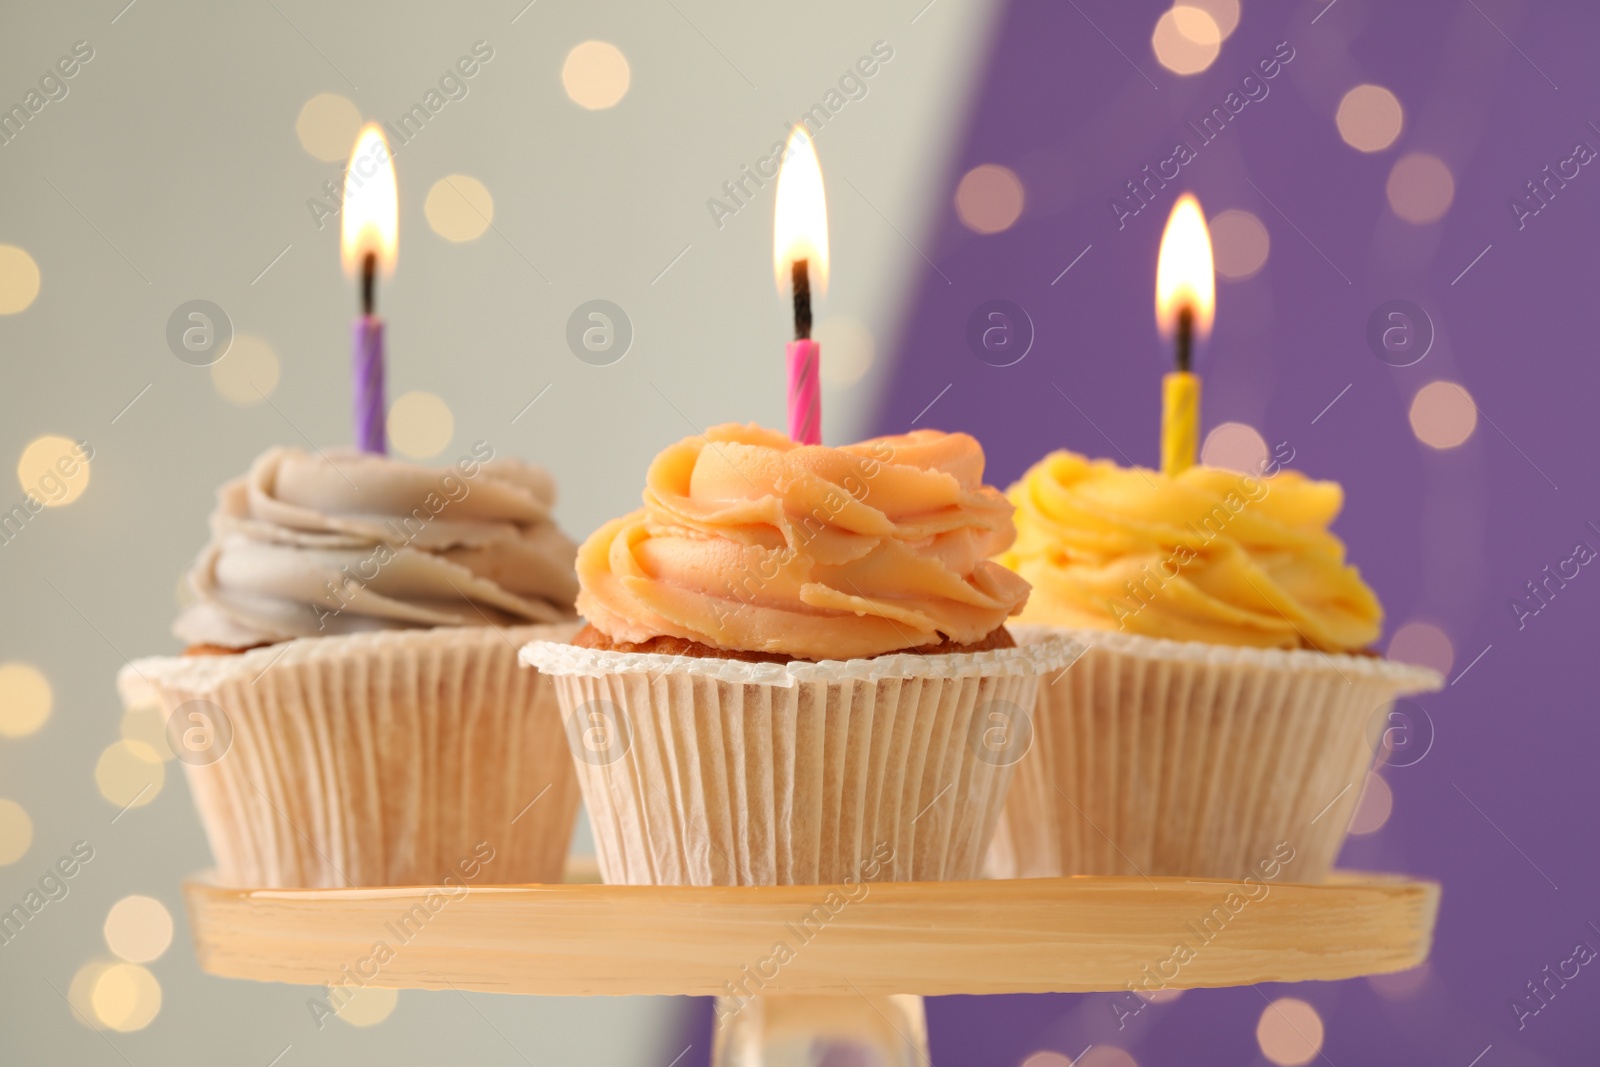 Photo of Tasty birthday cupcakes with candles on stand against blurred lights, closeup